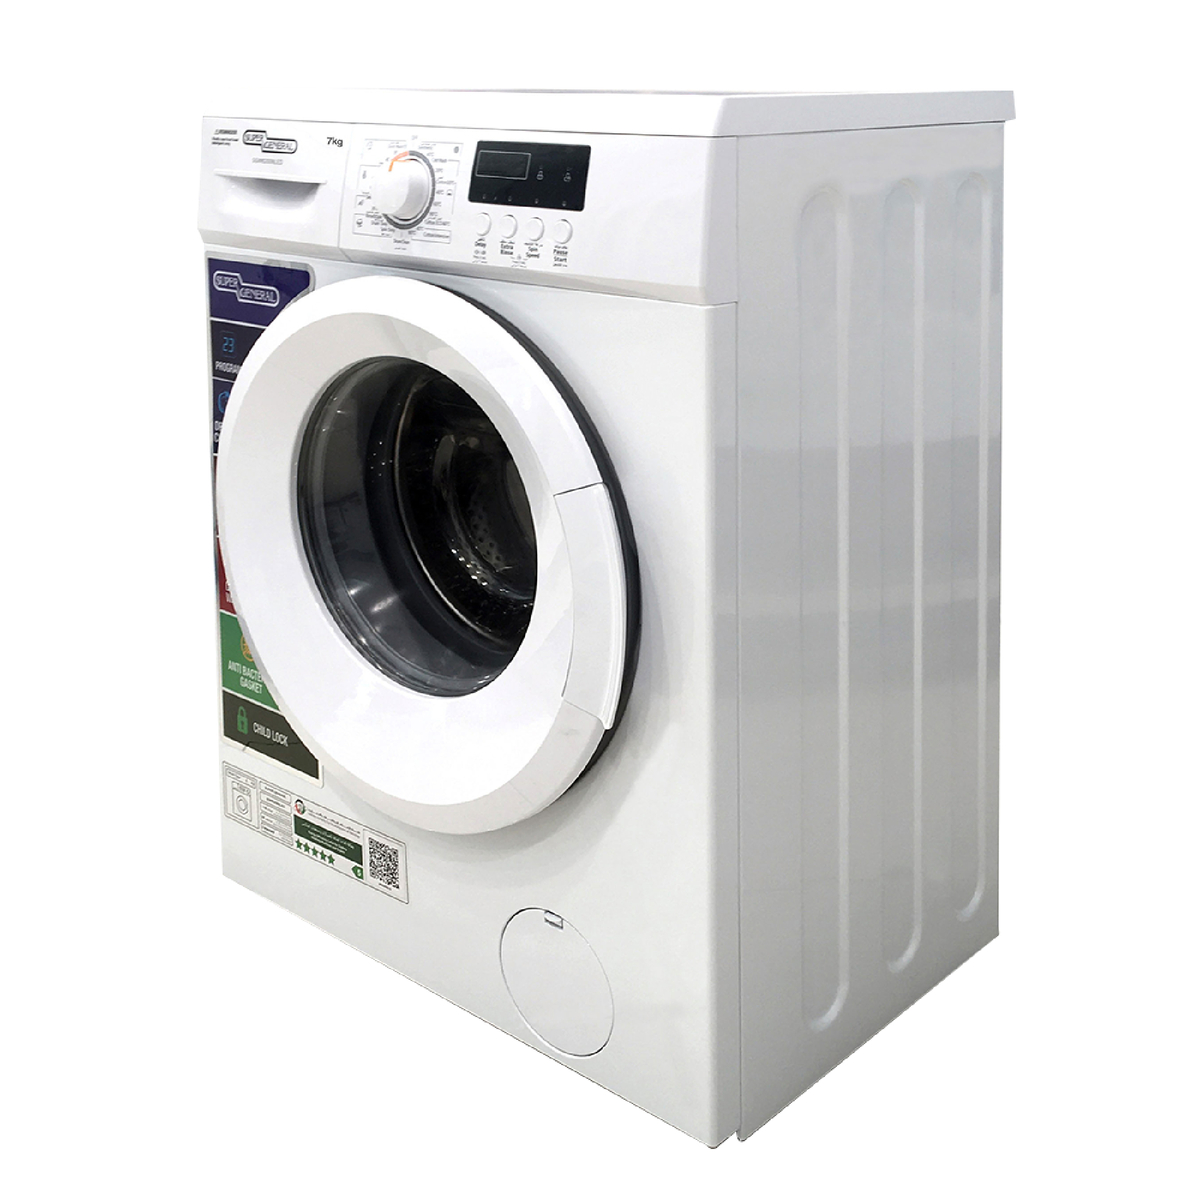 Super General 7 kg Front Load Washing Machine, 1400 RPM, White, SGW7200NLED